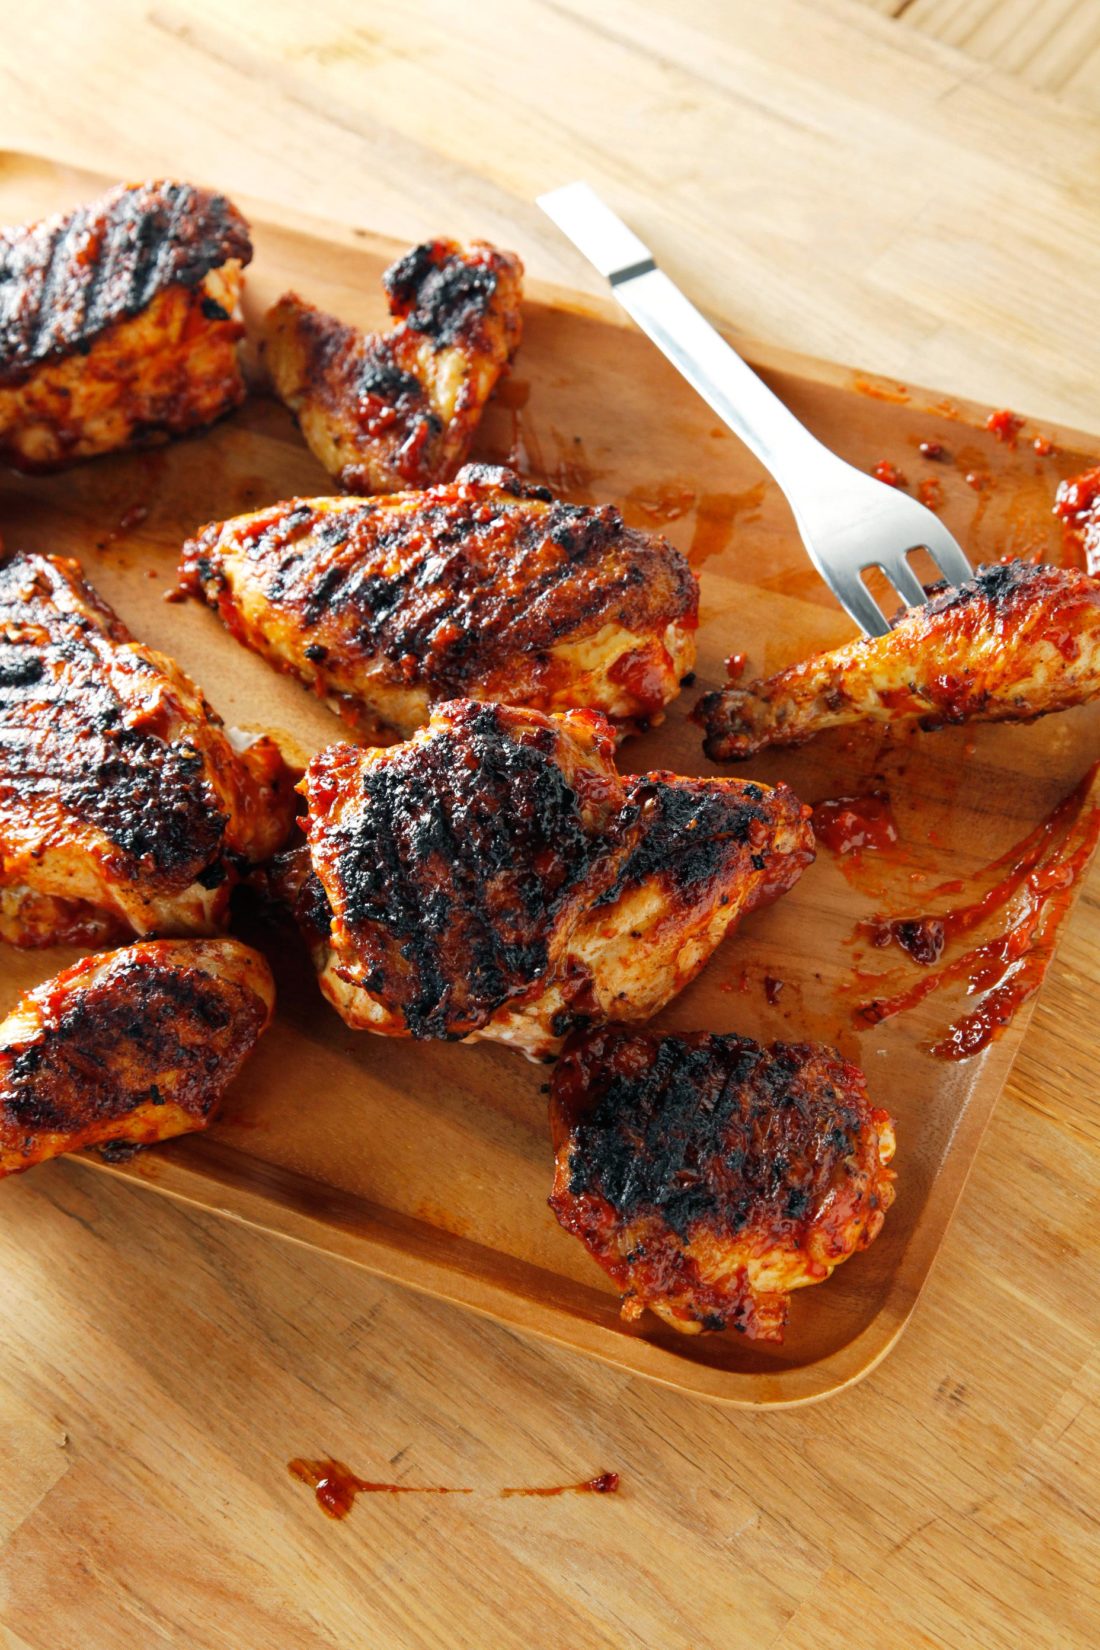 Barbecued Chicken on a wooden surface with a serving fork.